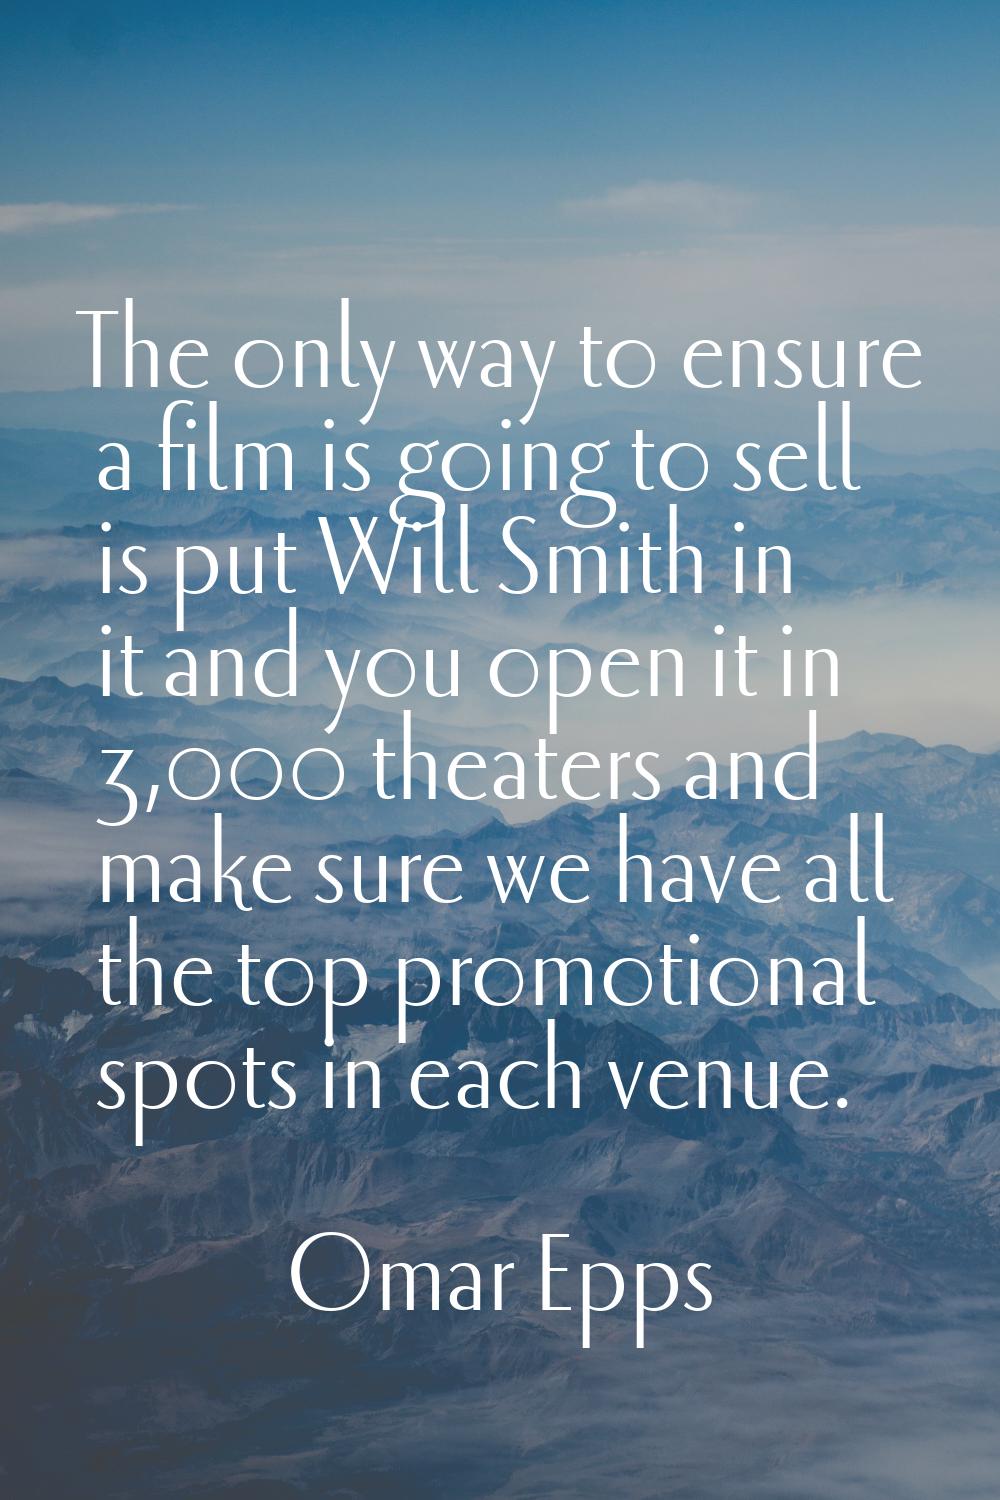 The only way to ensure a film is going to sell is put Will Smith in it and you open it in 3,000 the